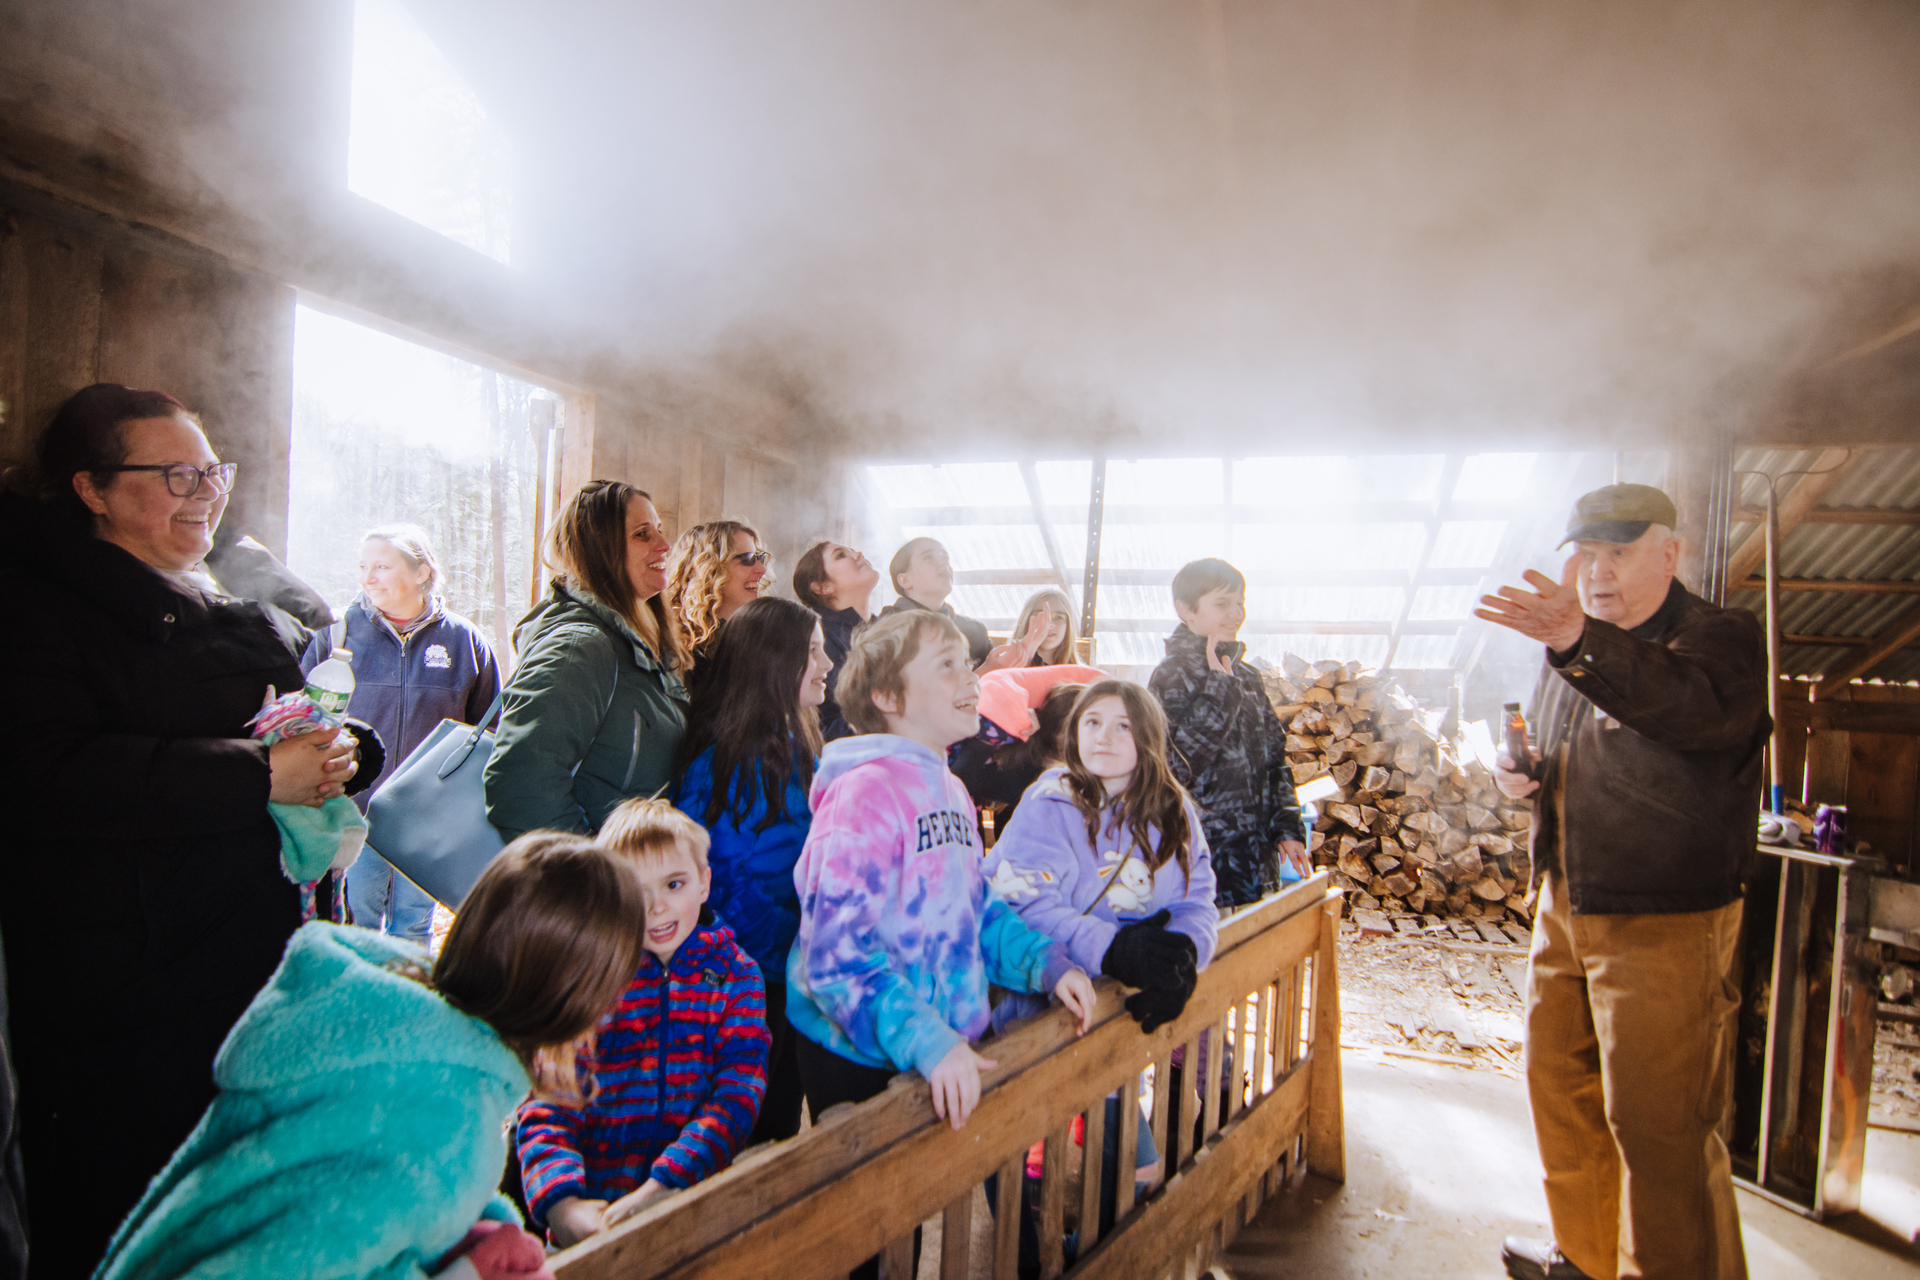 Moose Hill staff giving a maple sugaring demonstration for a small crowd